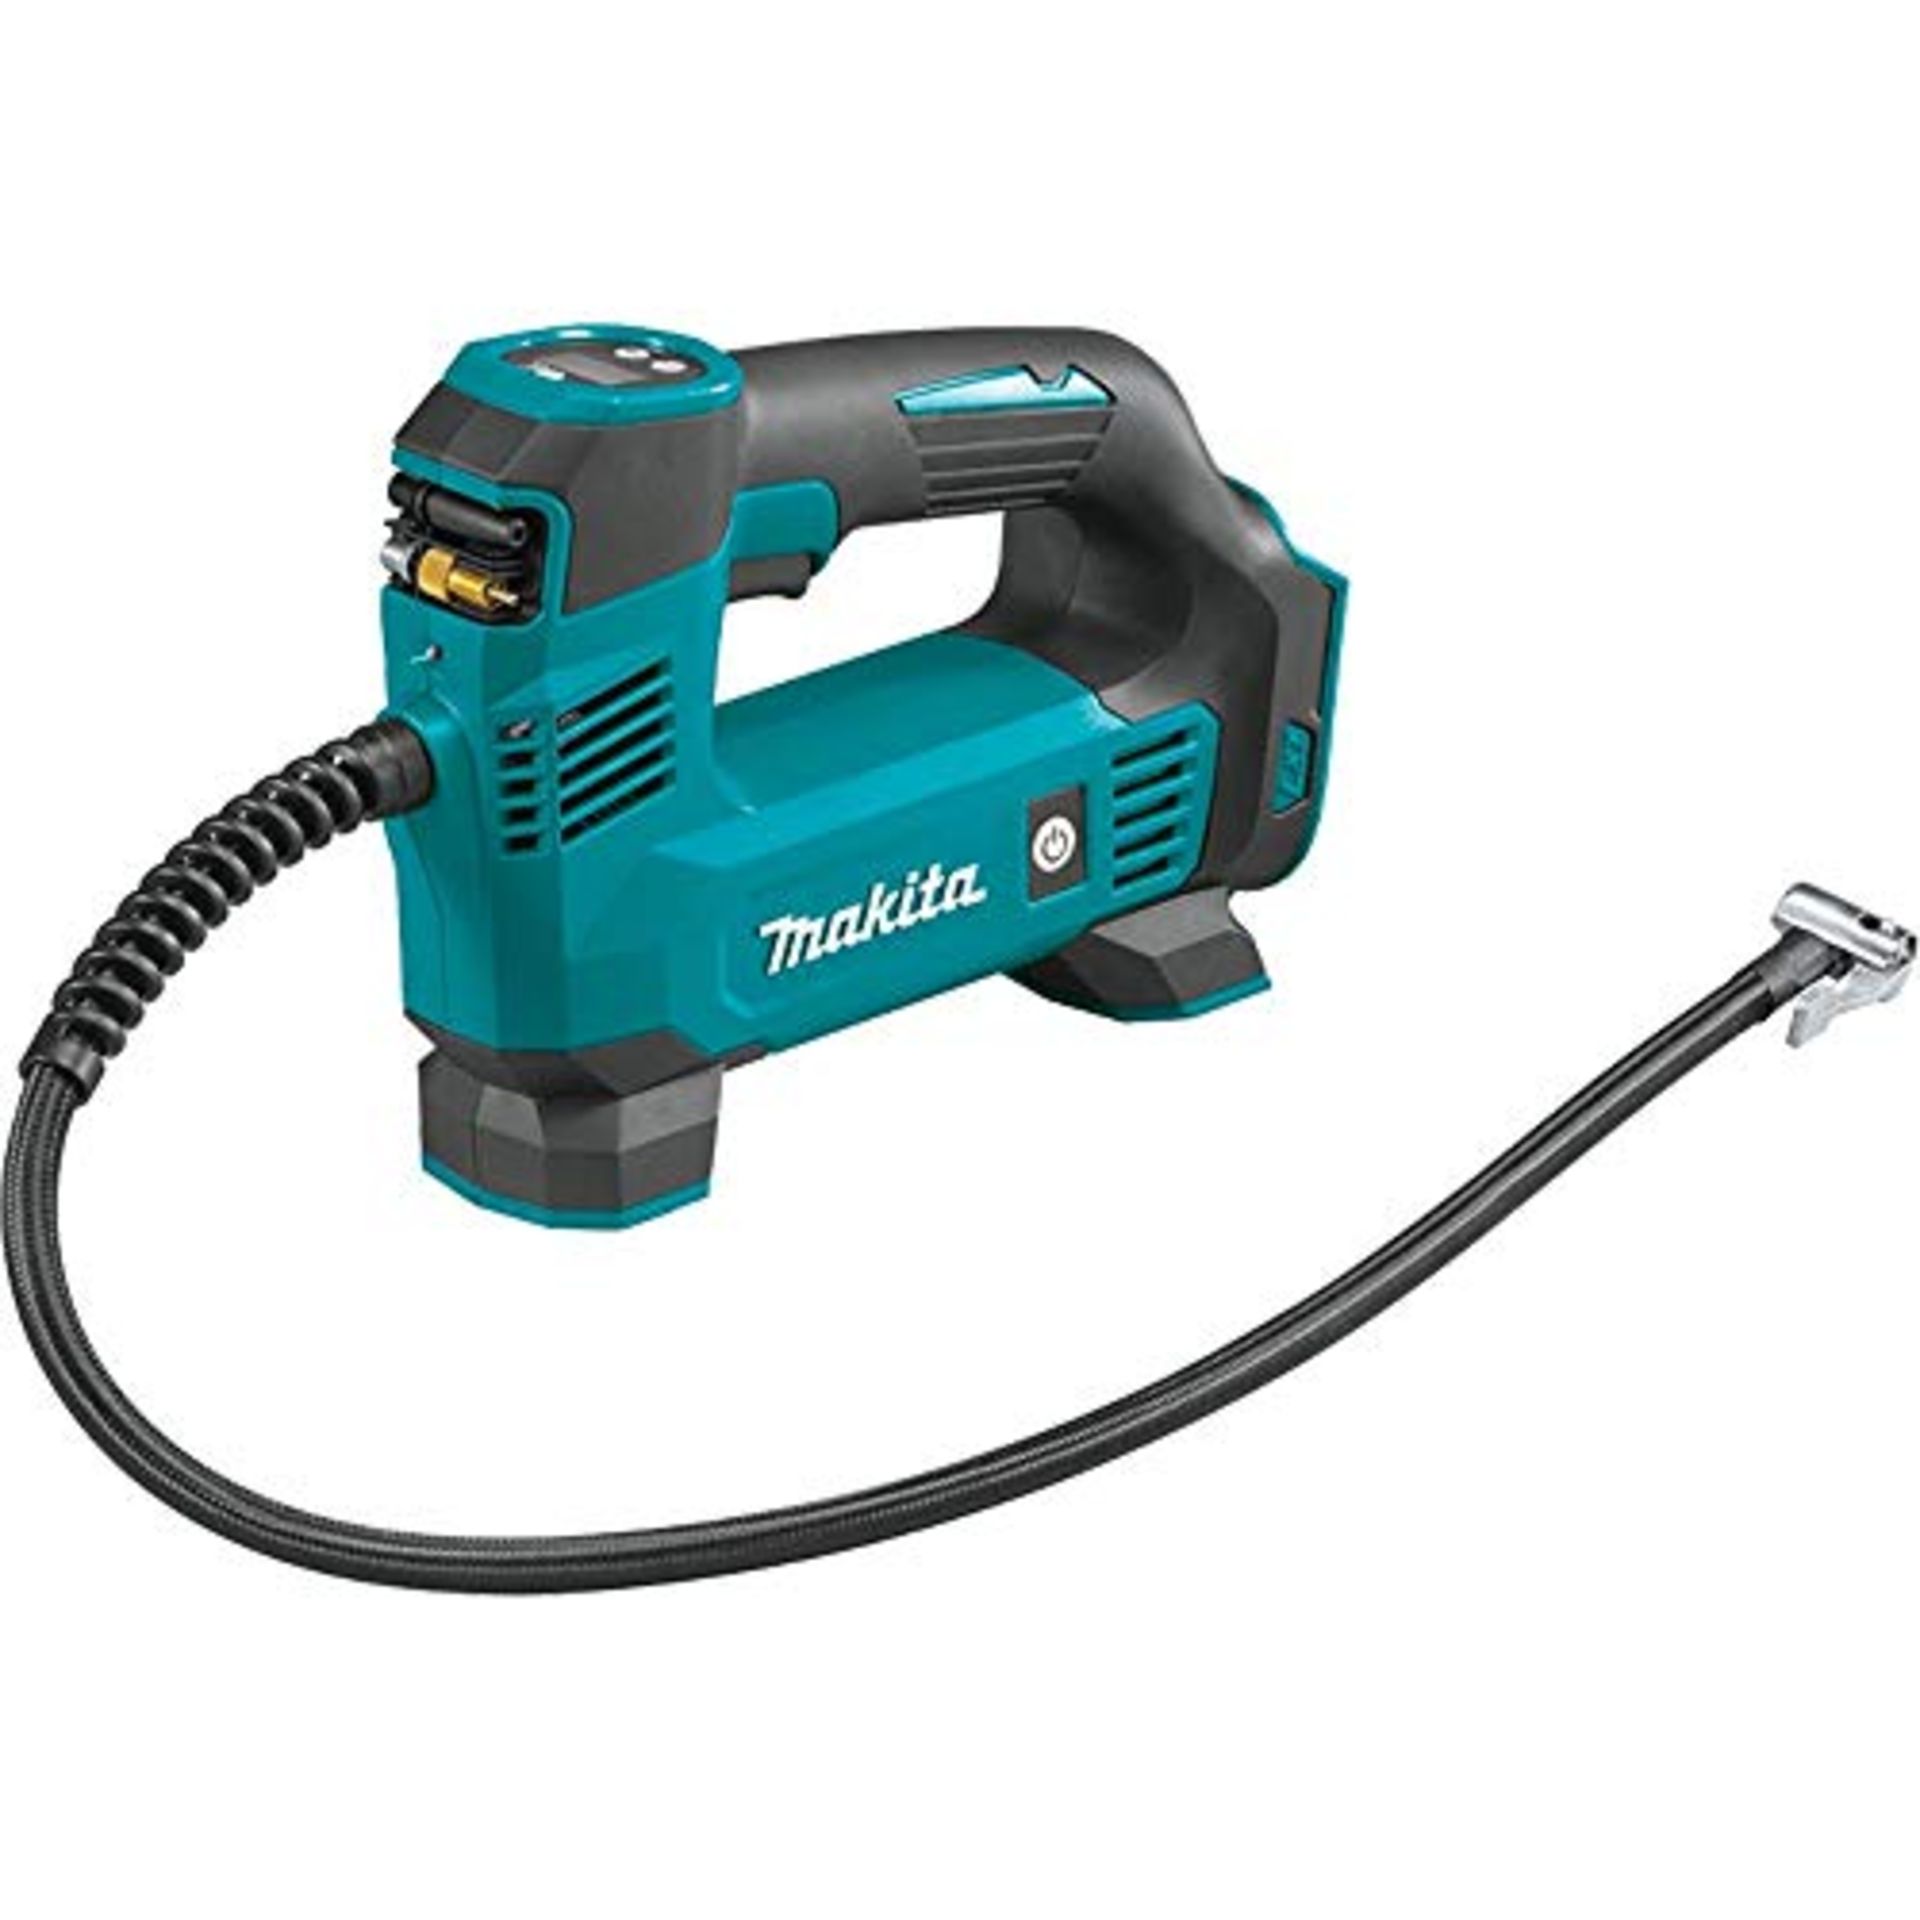 Makita DMP180Z 18V Li-ion LXT Inflator - Batteries and Charger Not Included, Blue/Silv